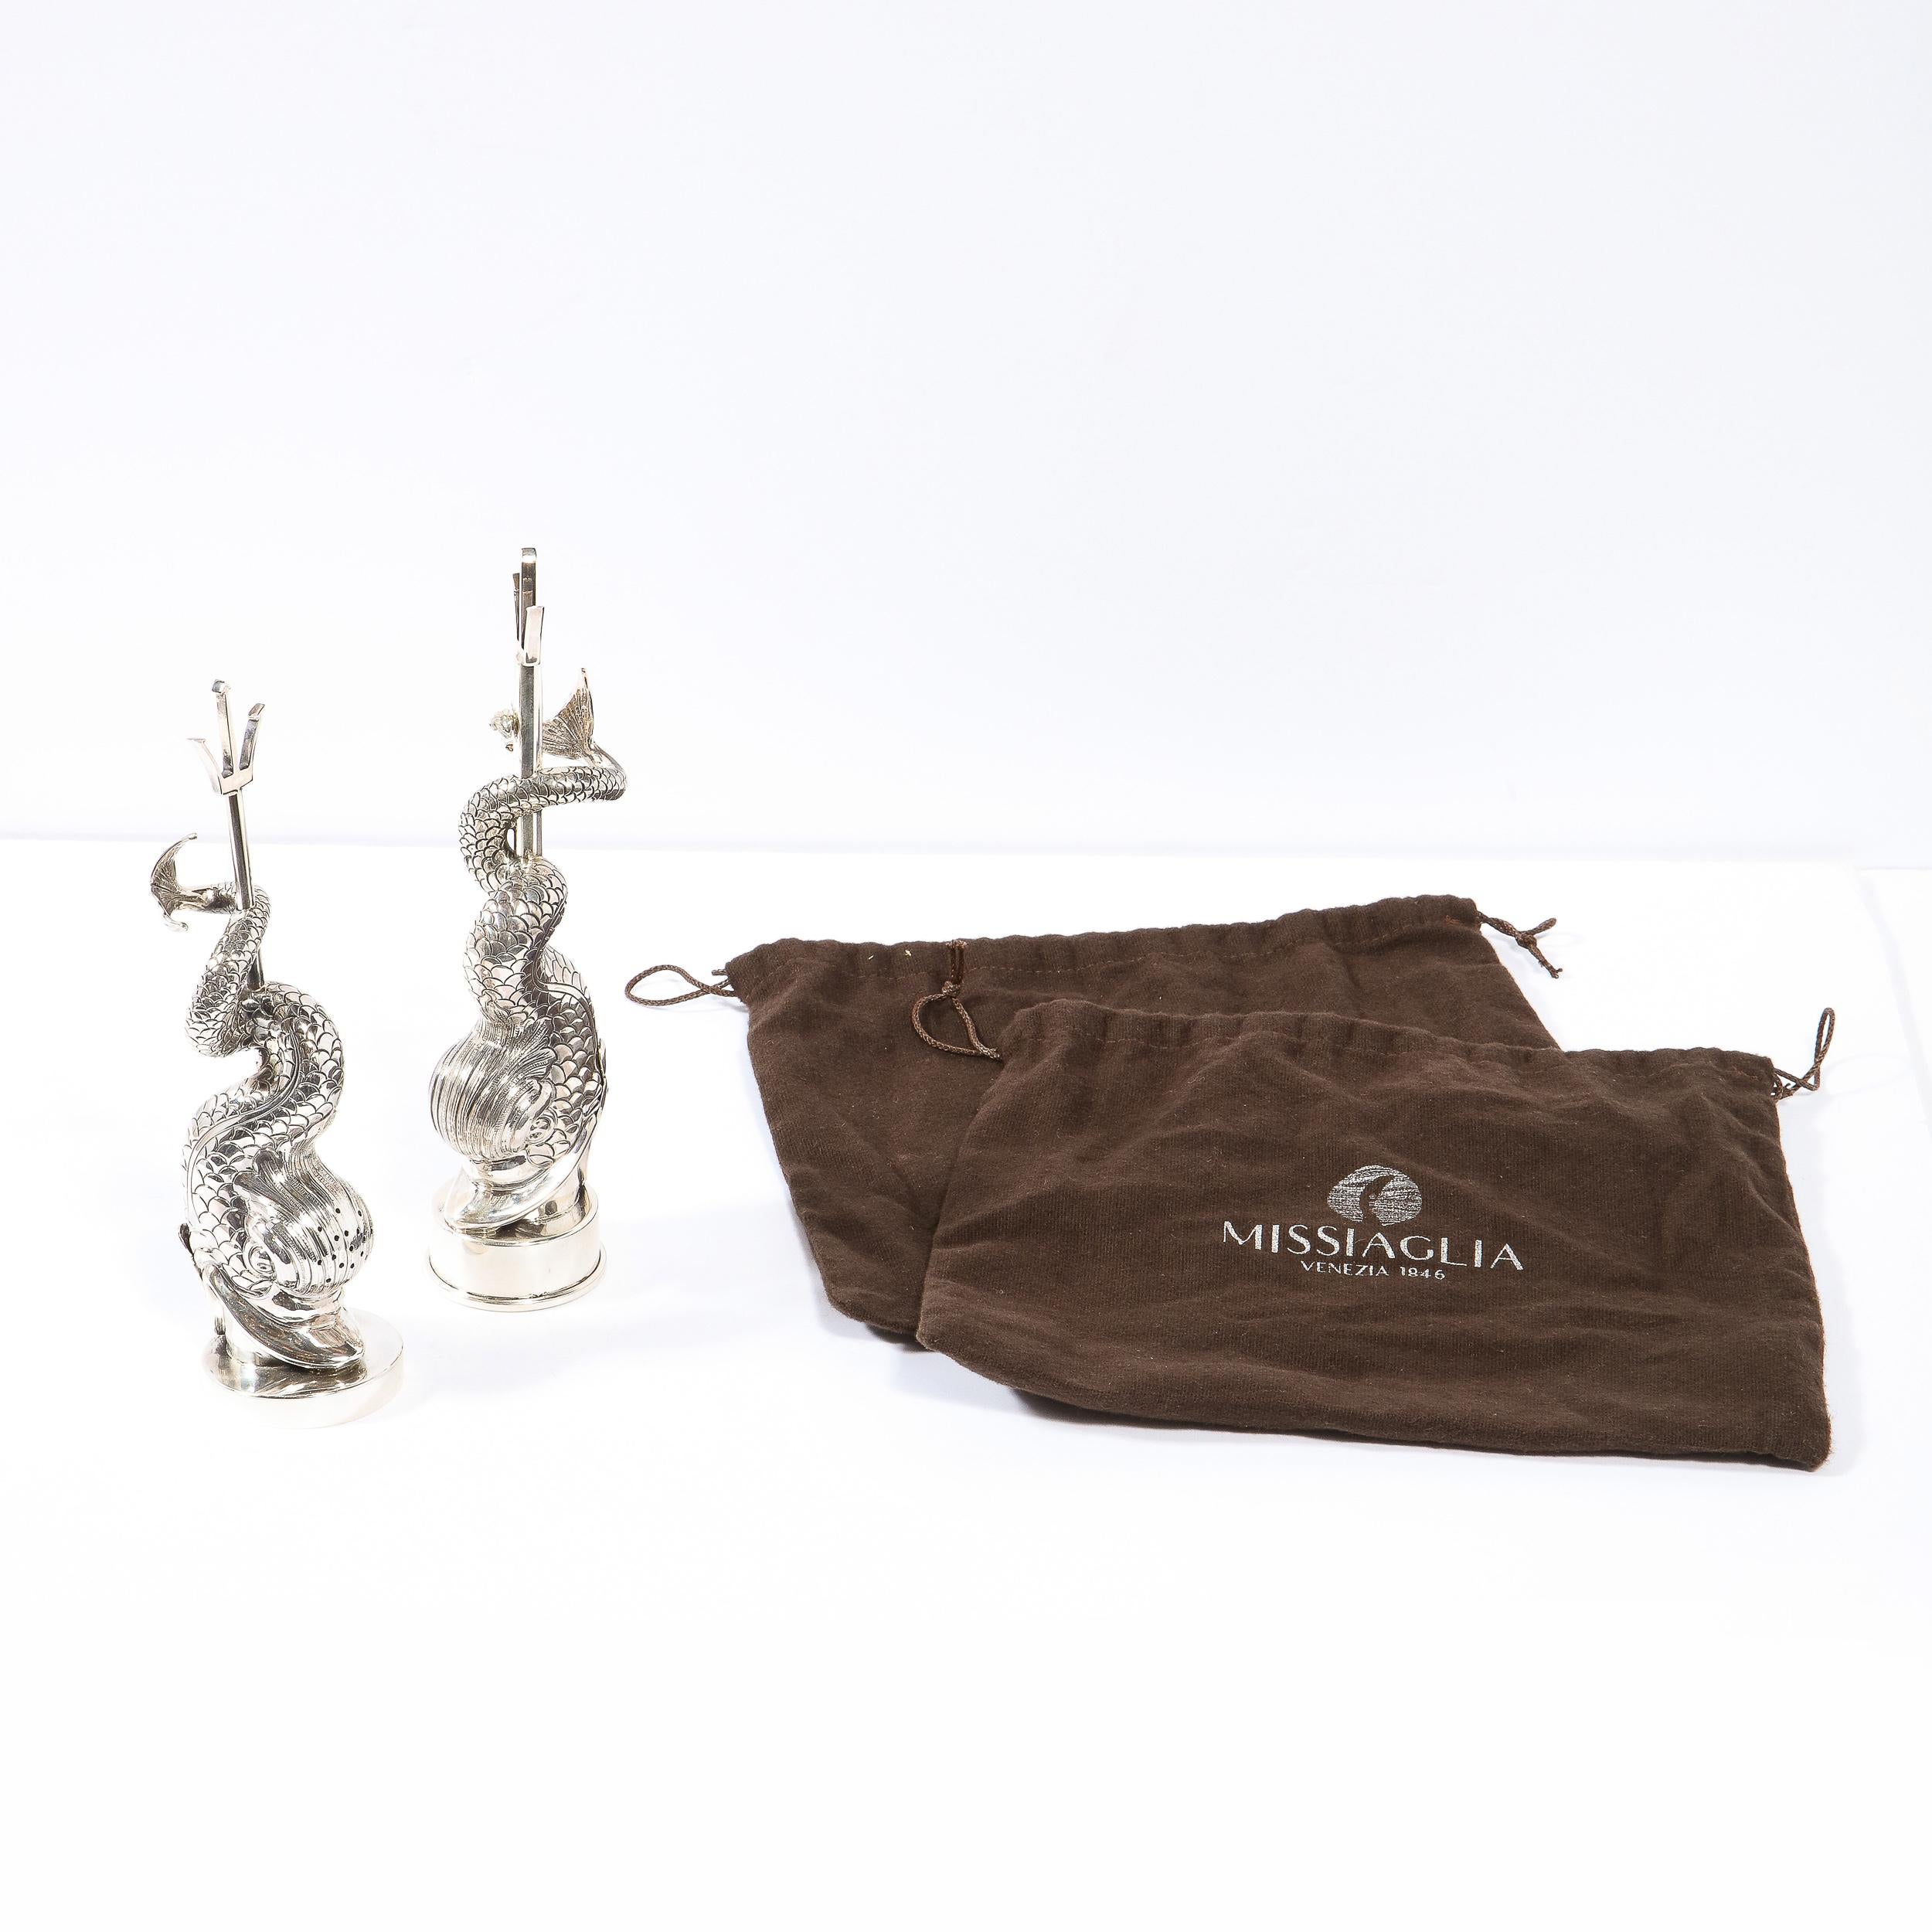 Established in Venice in 1846, Missiaglia is one of the world's premier makers of the finest jewelry objects, as well as a select number of bespoke sterling silver tabletop accessories. This handcrafted stylized sea dolphin shaker and pepper mill